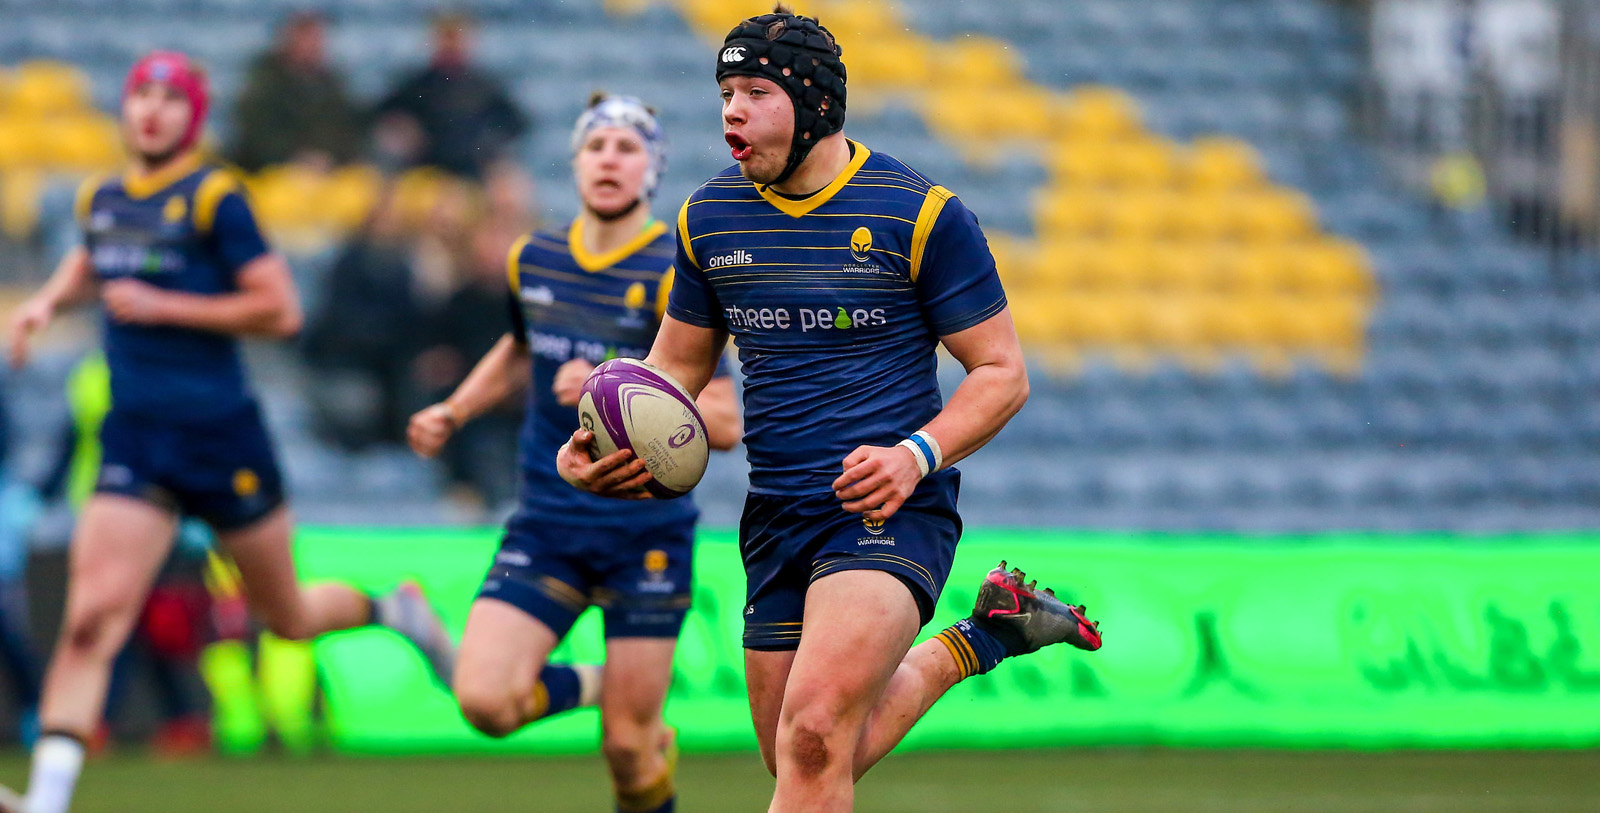 Truby called up by Warriors Under-18s